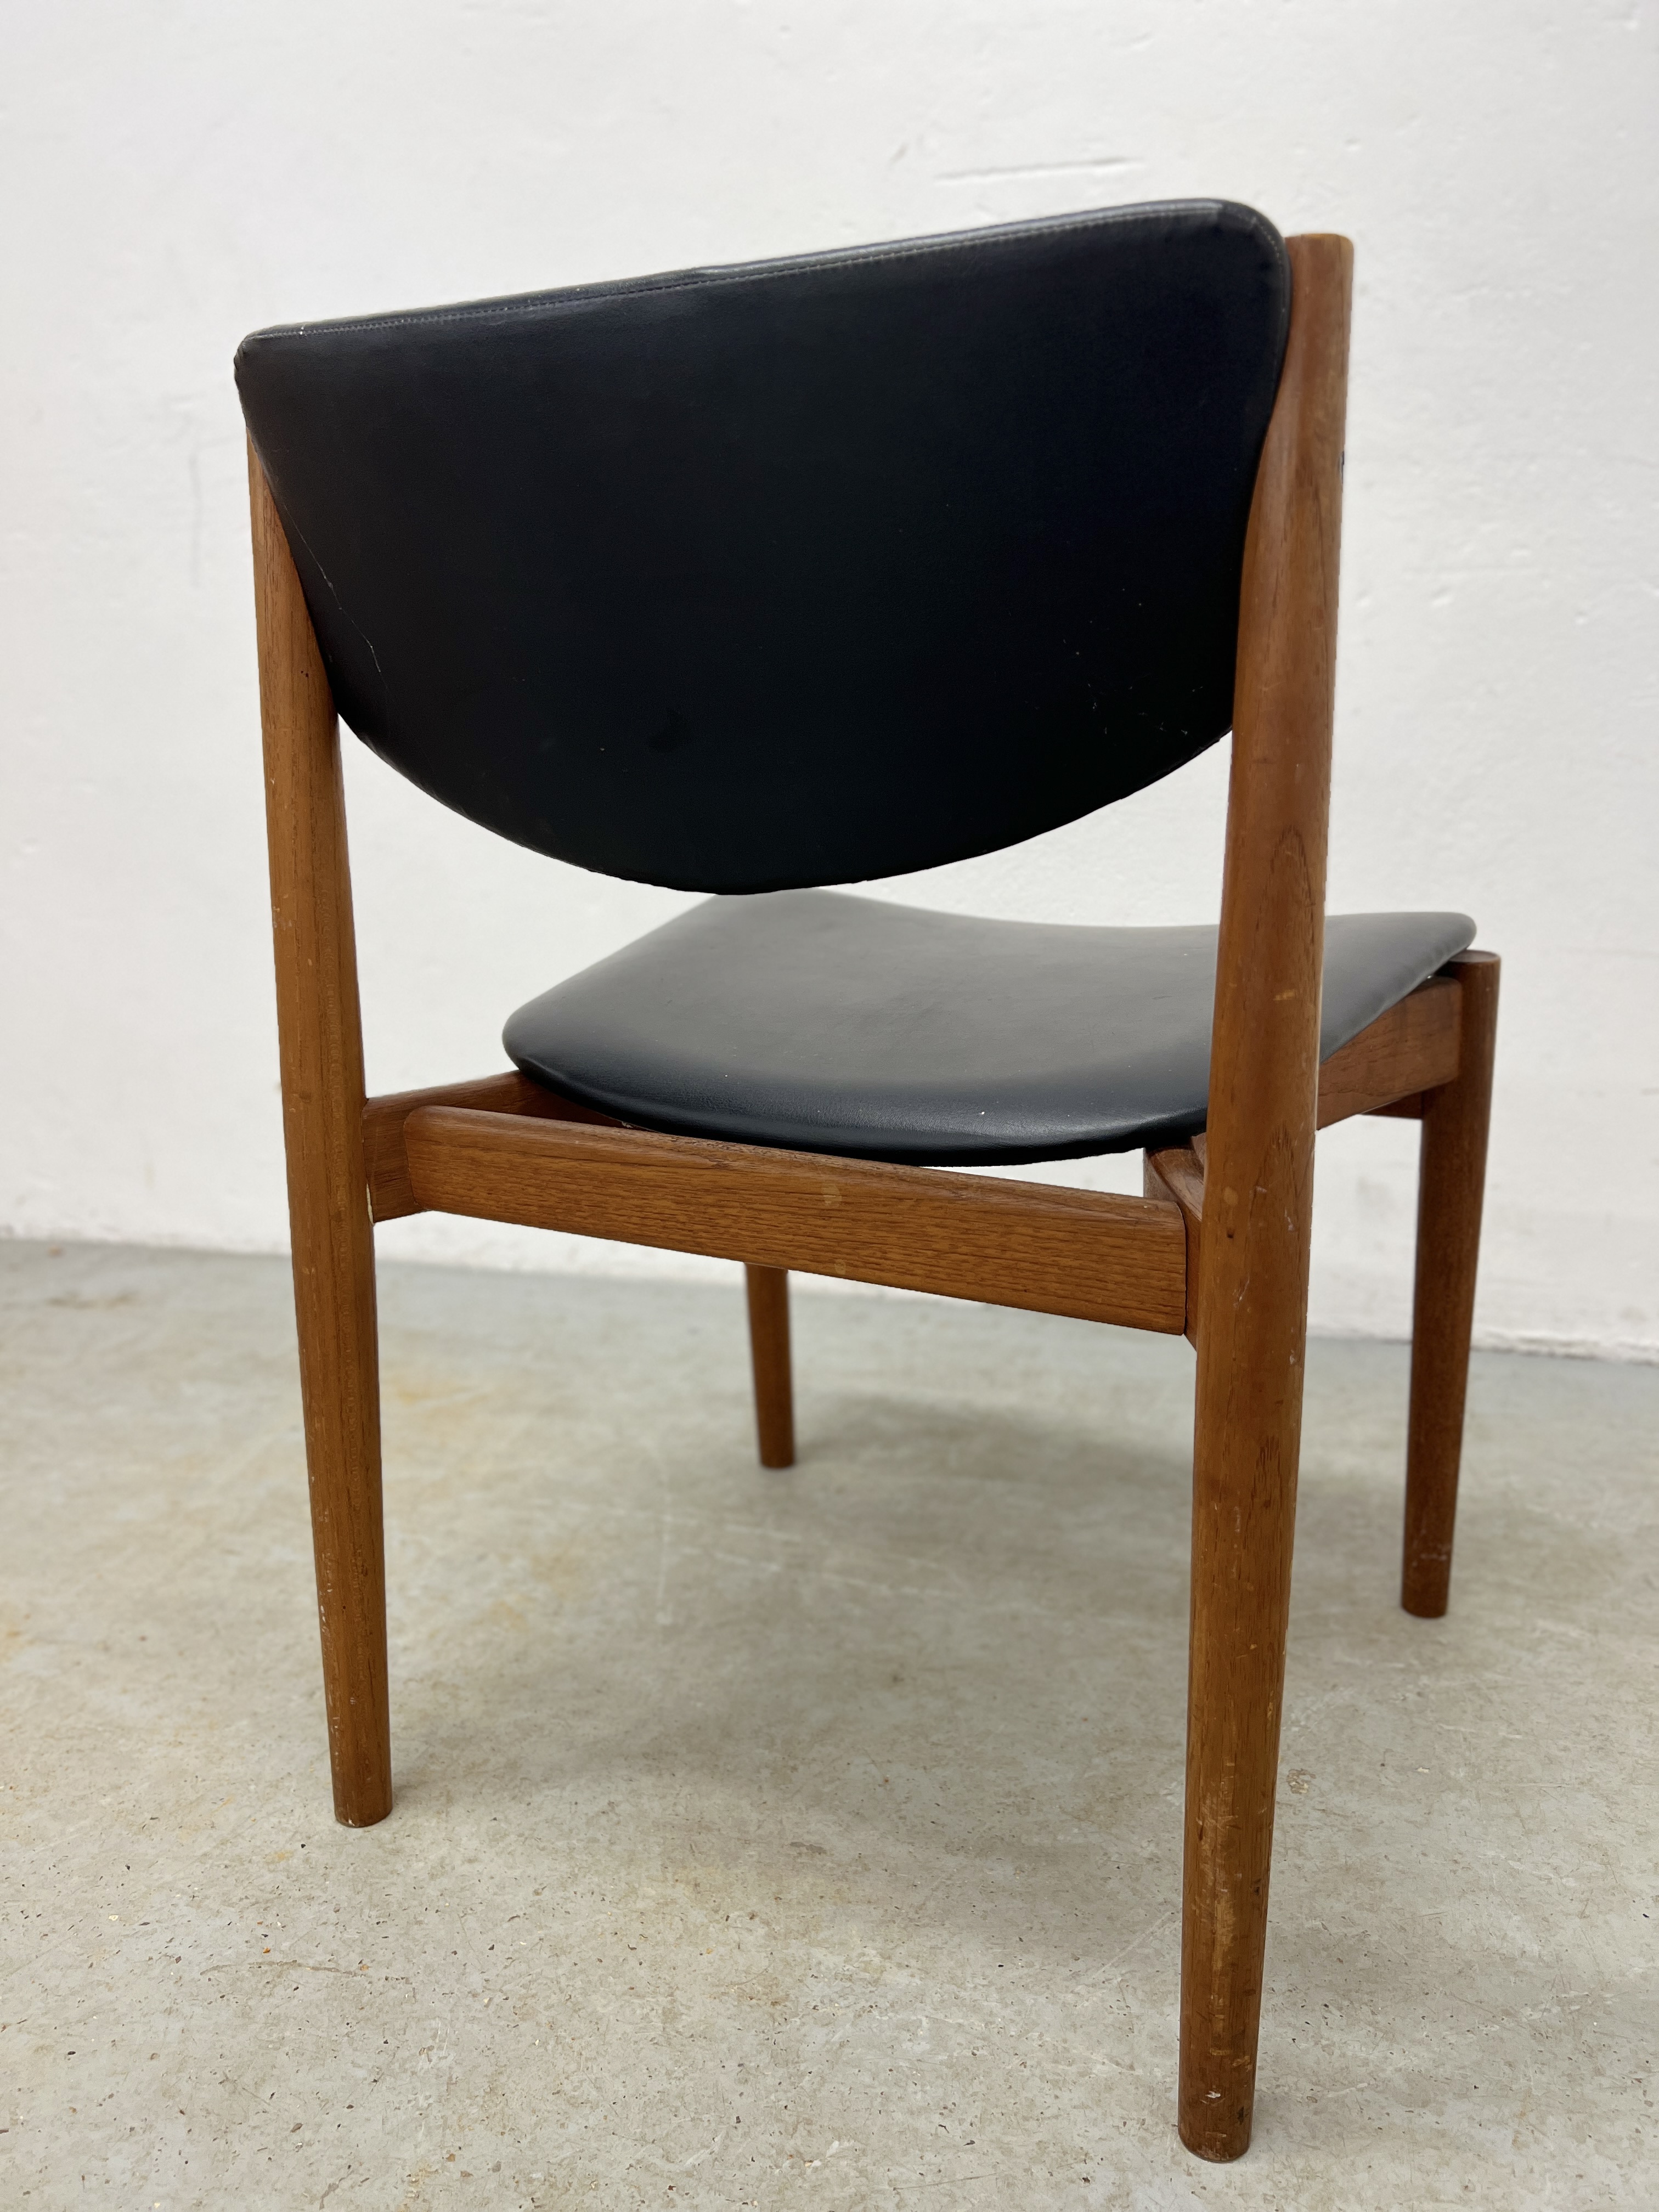 A MID CENTURY DANISH TEAK SIDE CHAIR BEARING LABEL FRANCE & SON. DESIGNED BY FIN JUHL A/F NO. - Image 8 of 10